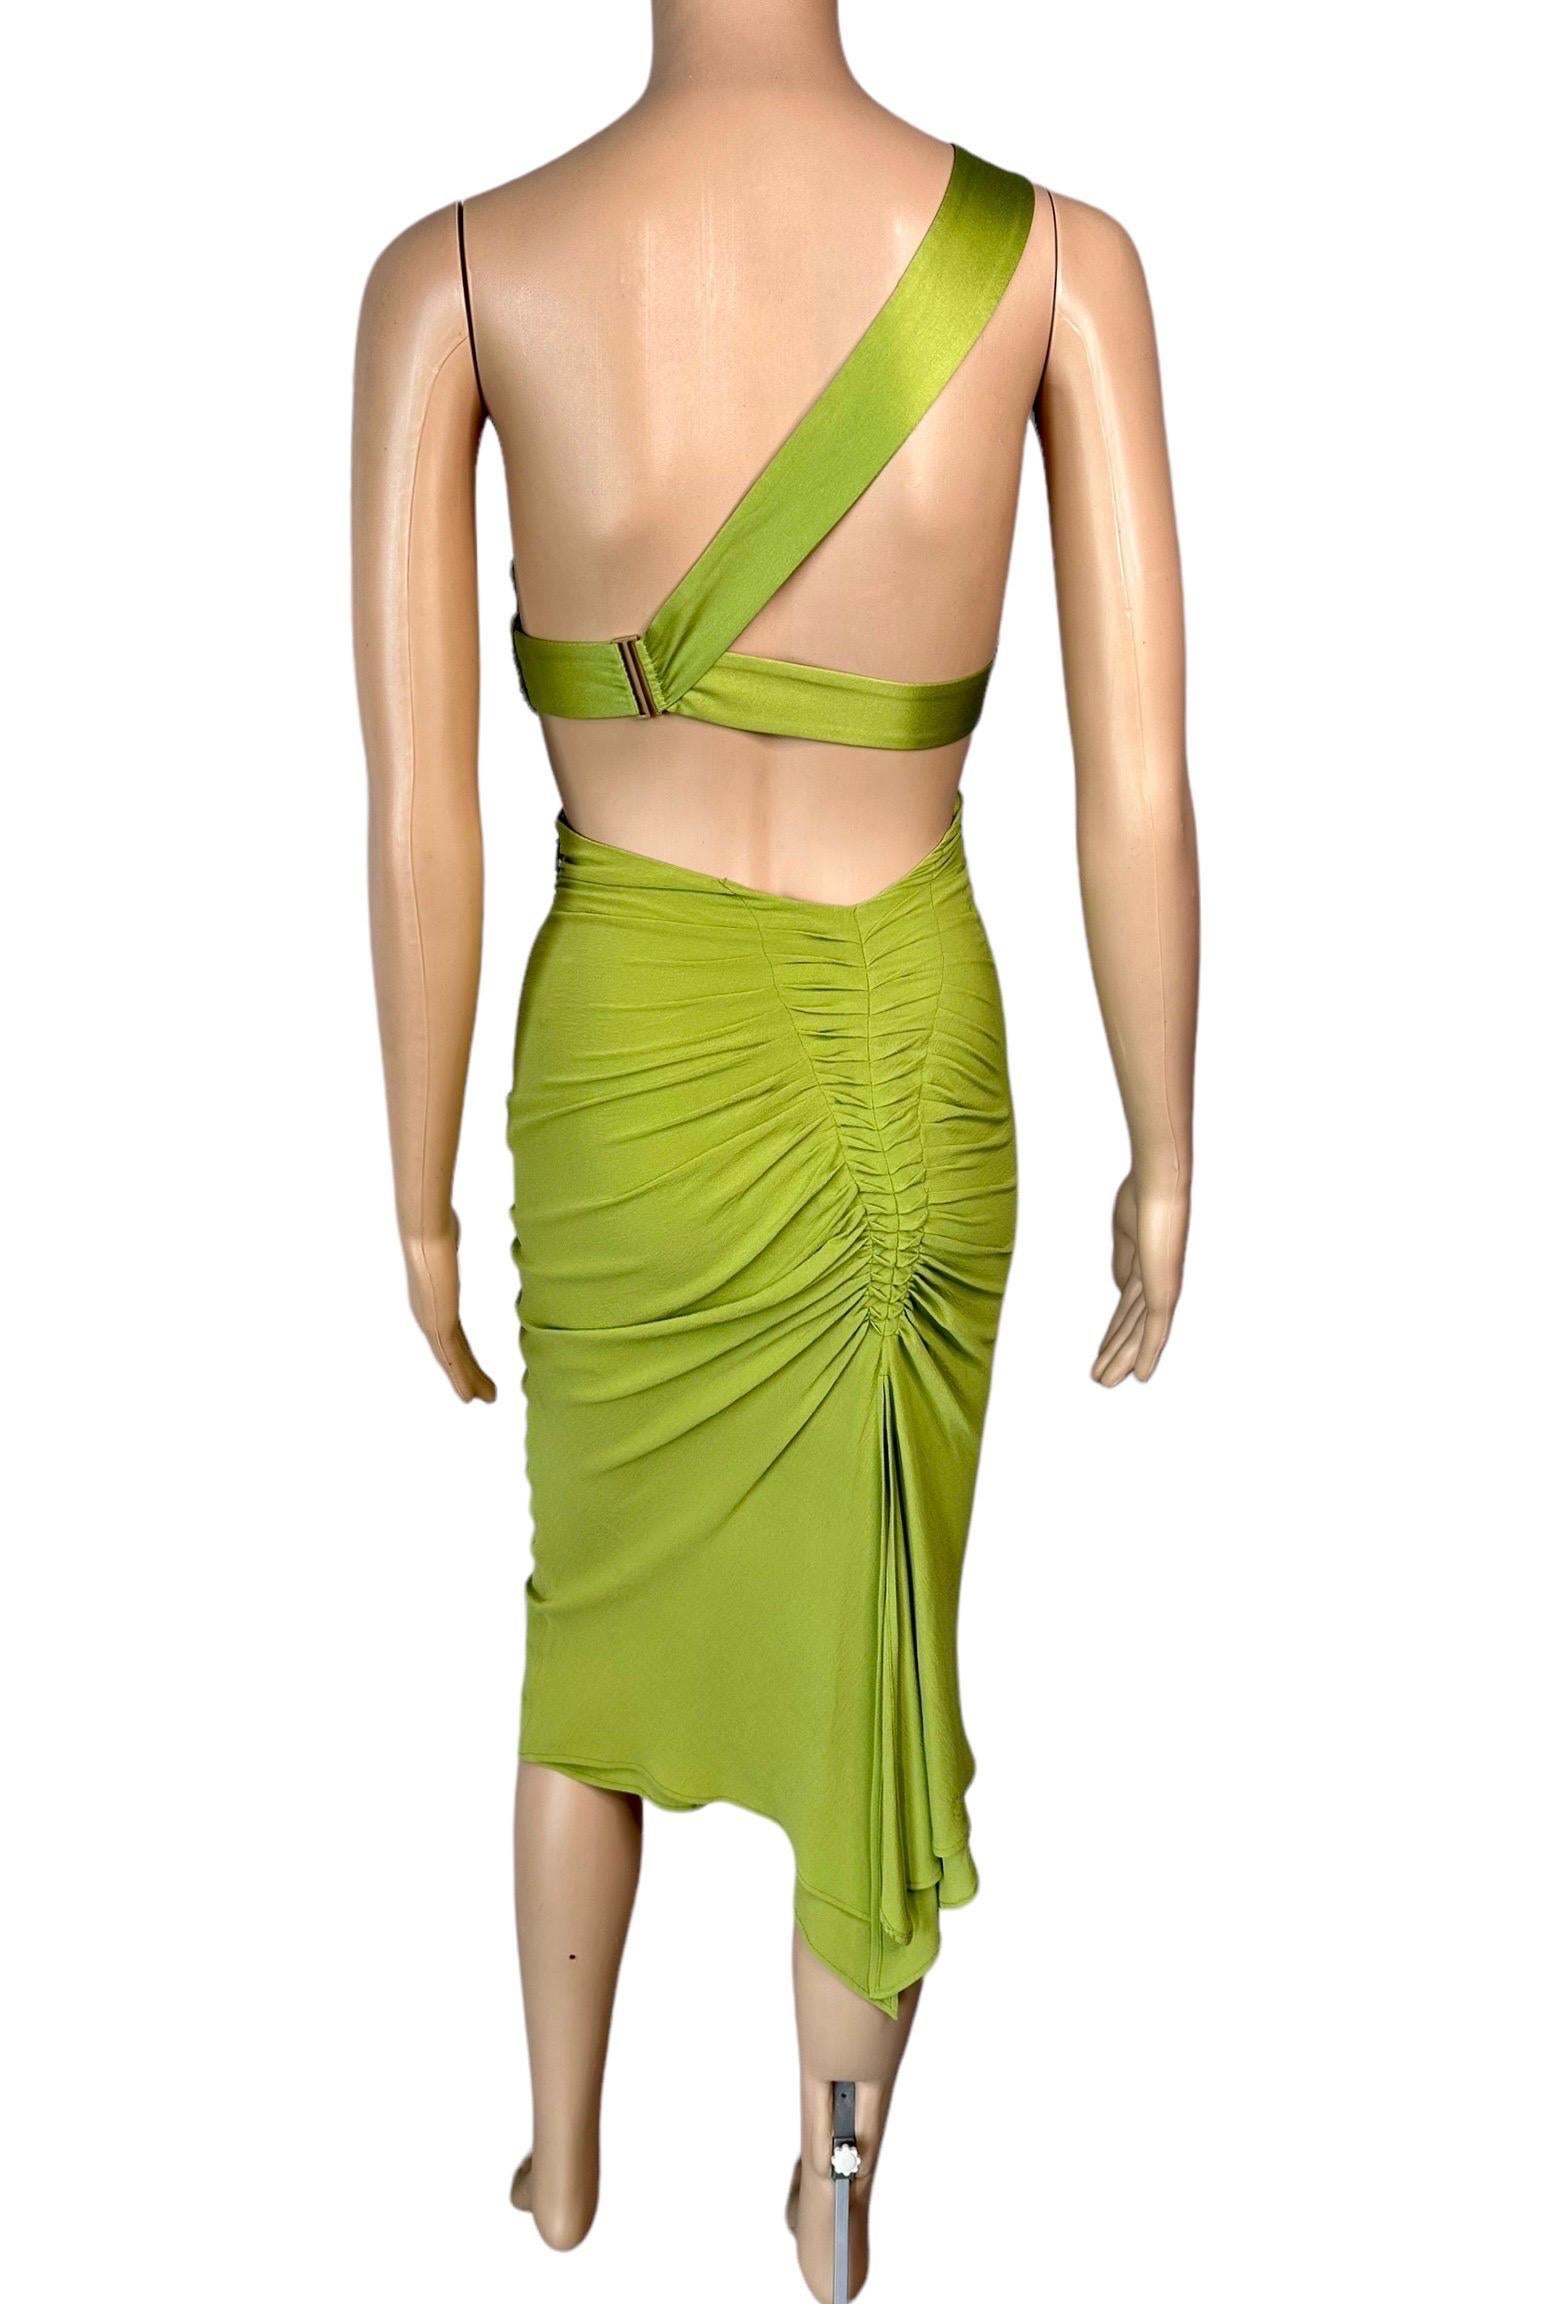 Green Tom Ford for Gucci F/W 2003 Bustier Bra Cutout Bodycon Dress  For Sale